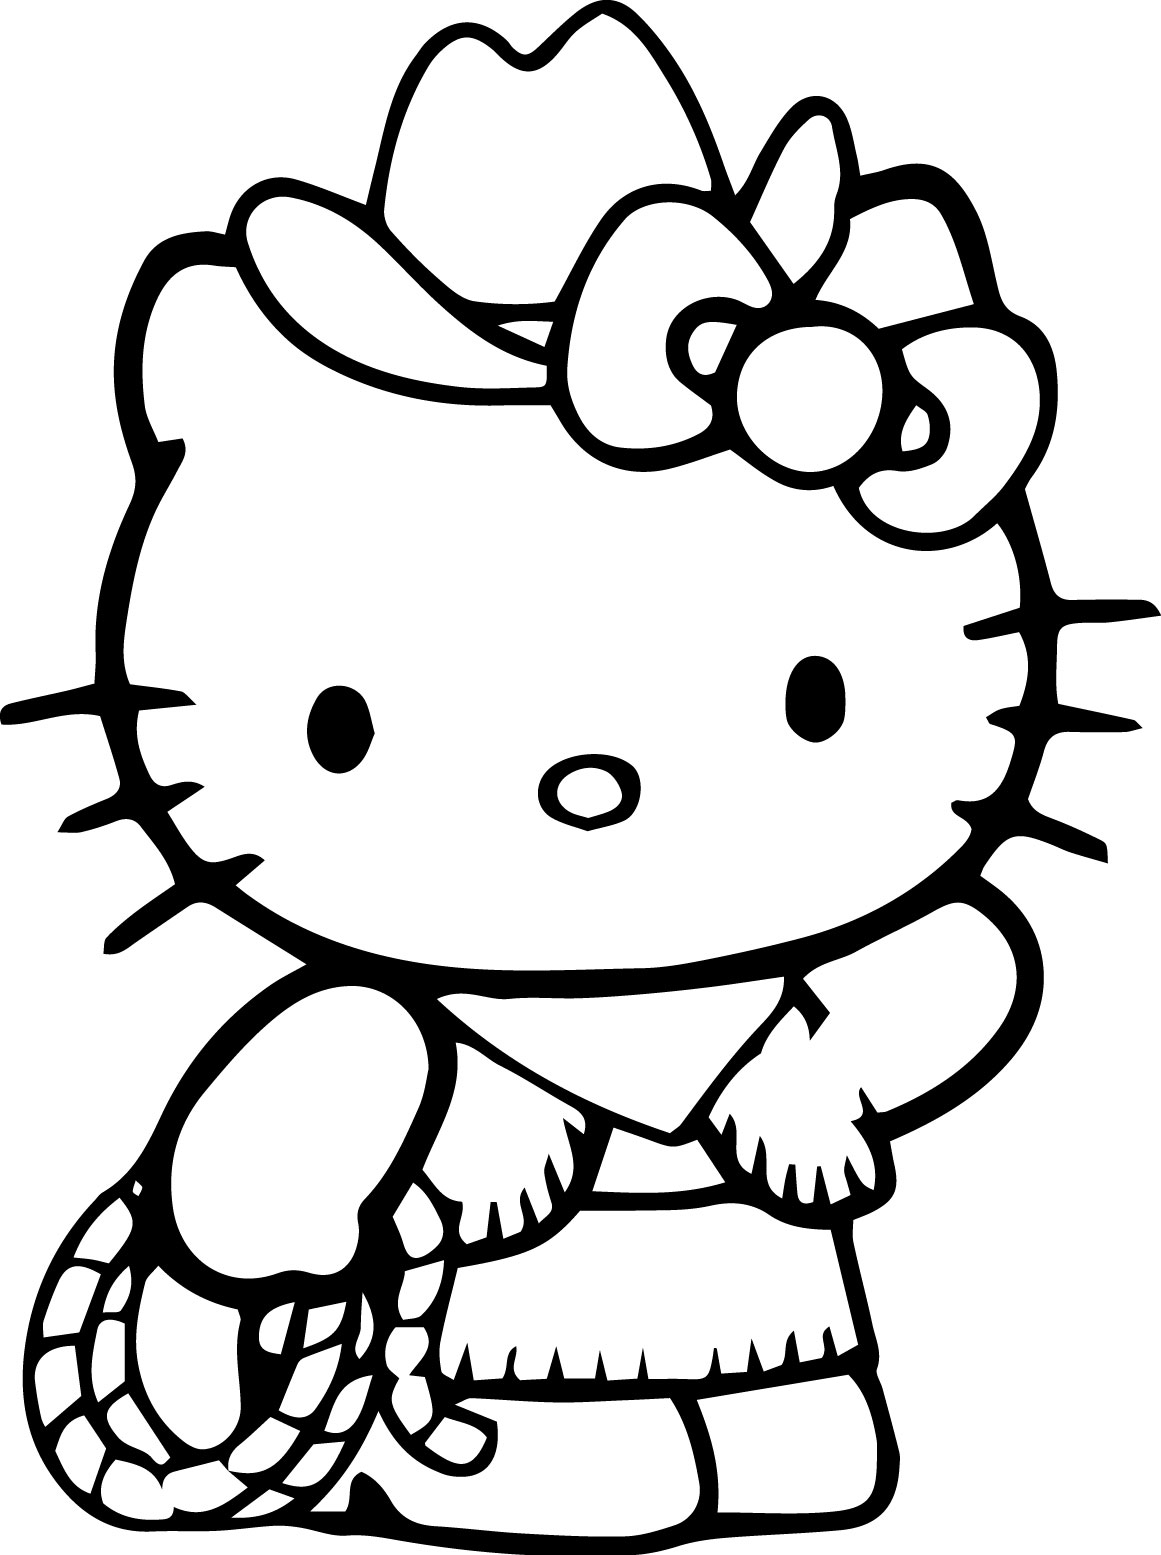 Hello Kitty Coloring Pages Images At GetDrawings Free Download